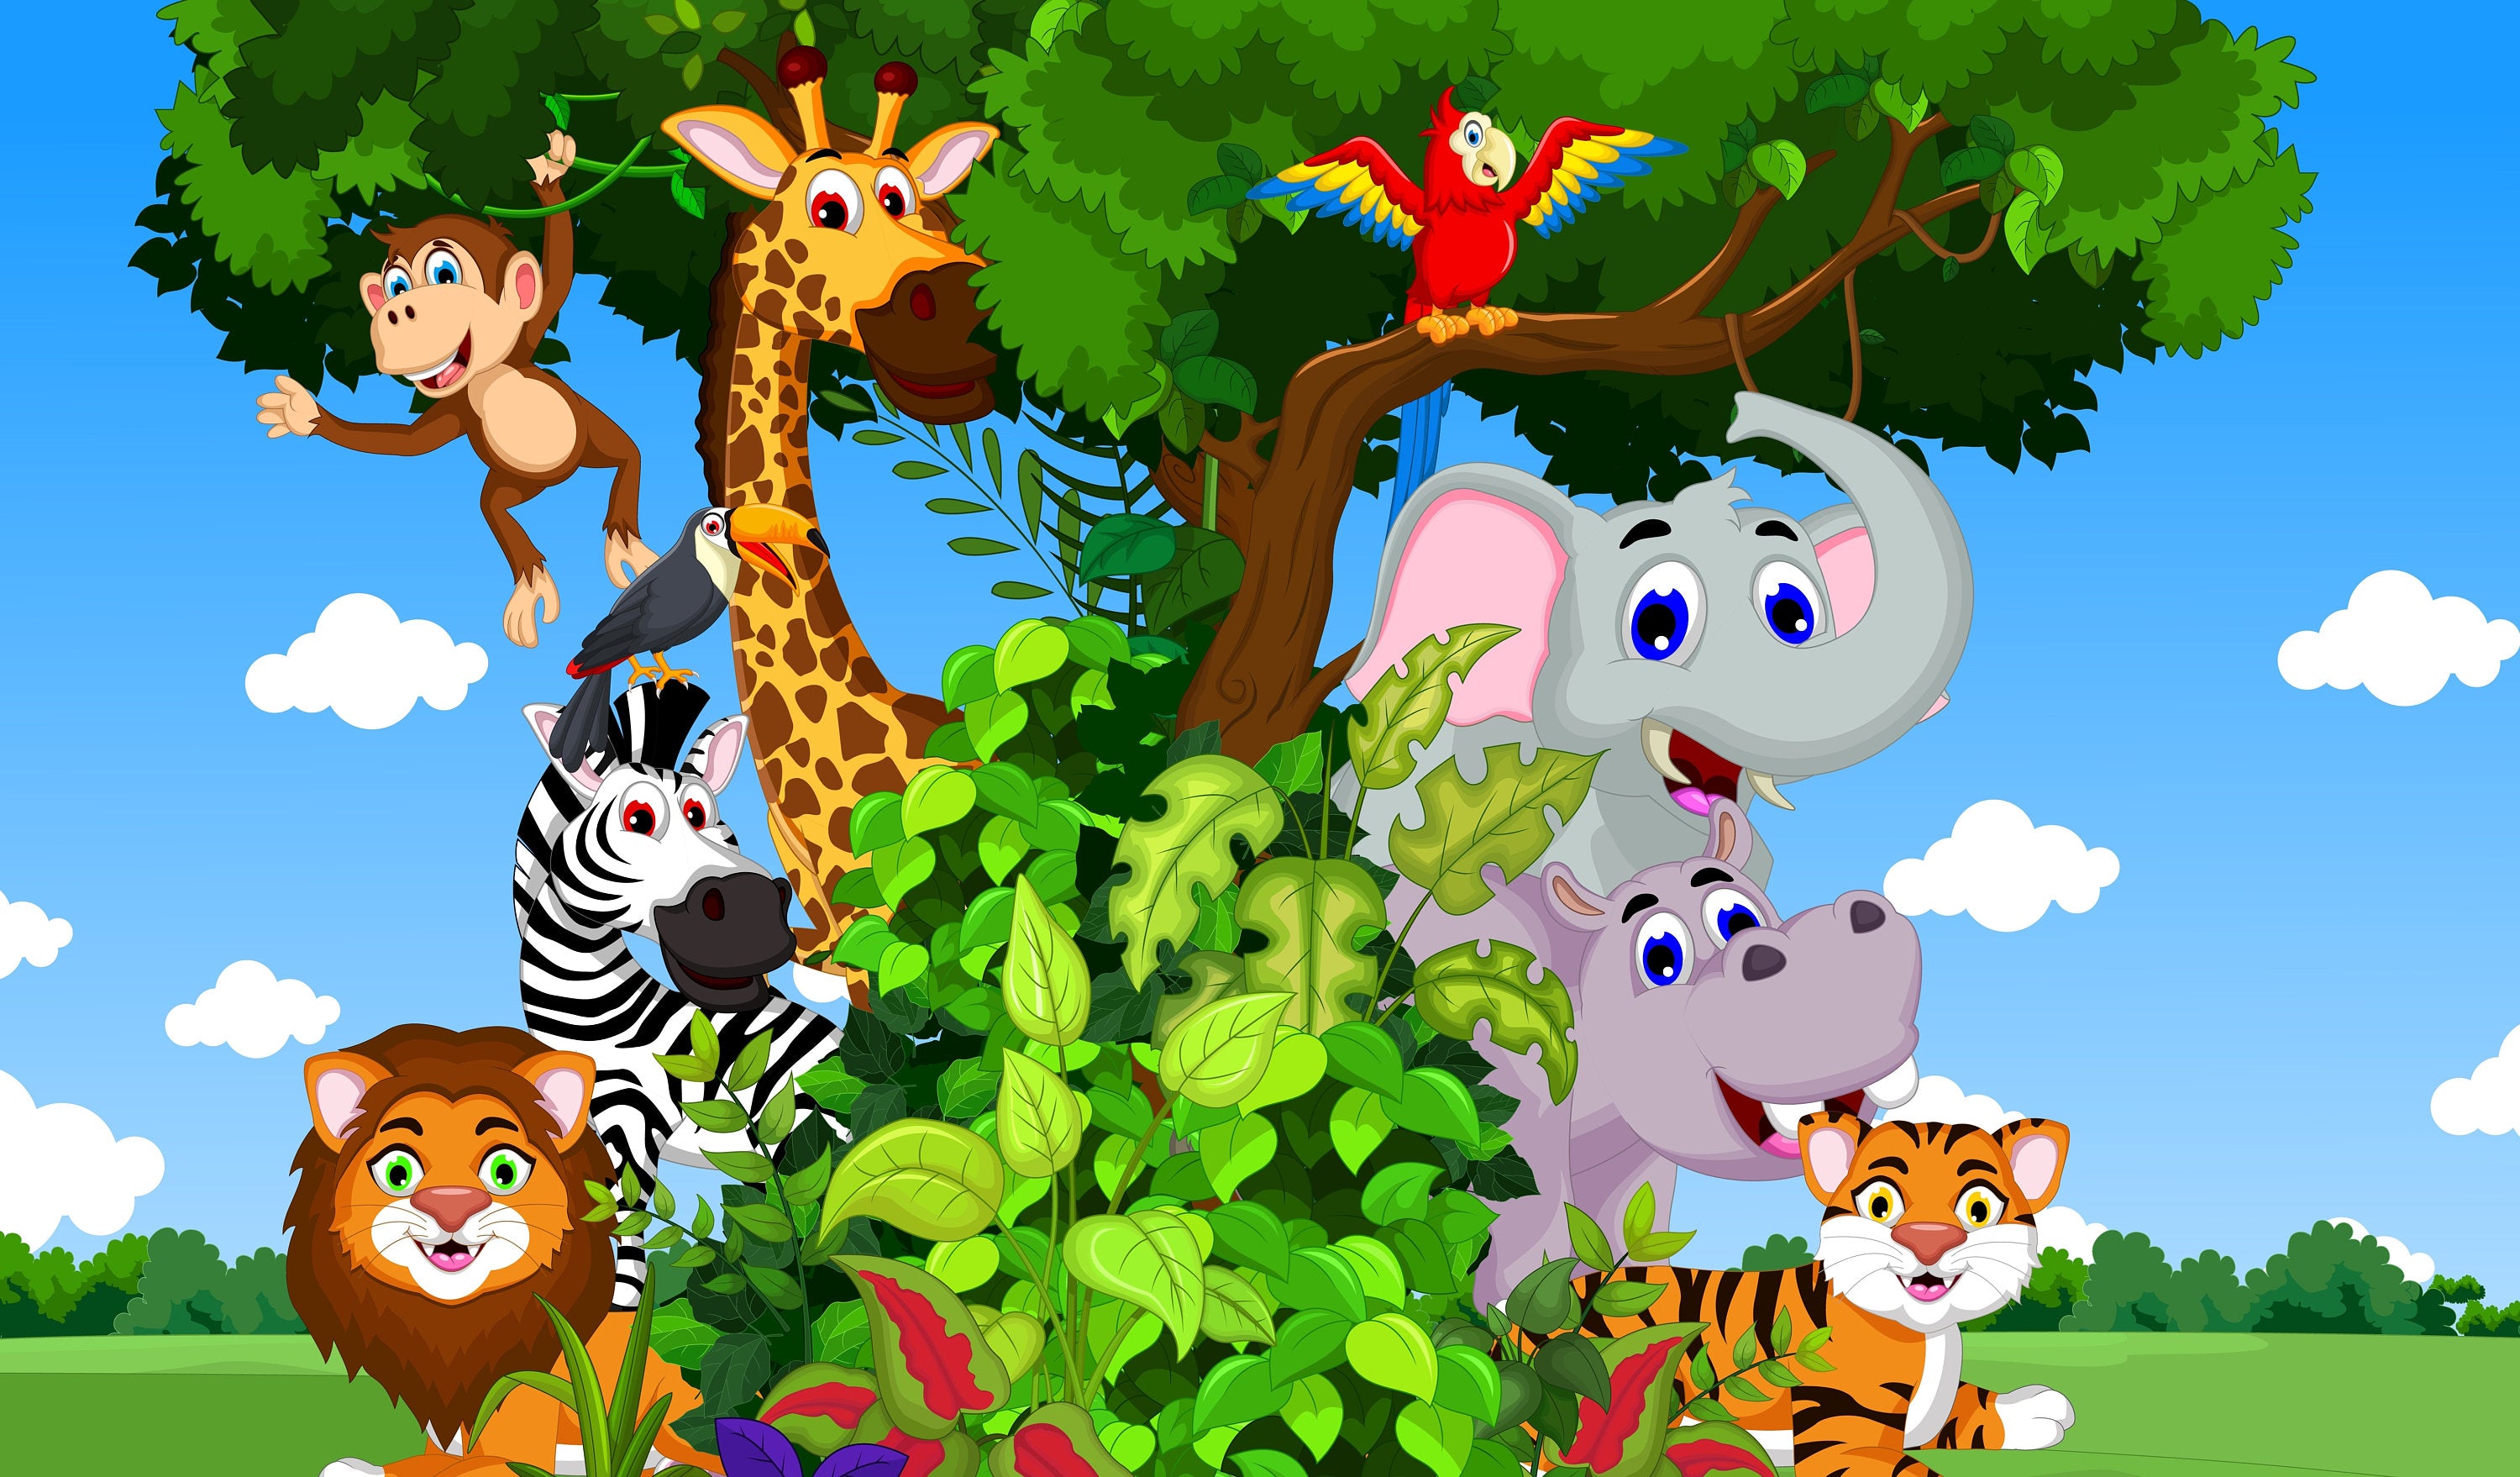 "Jungle Jubilee" Baby Shower and Birthday Backdrop 5x3 FT - Vibrant Animal Party Decor